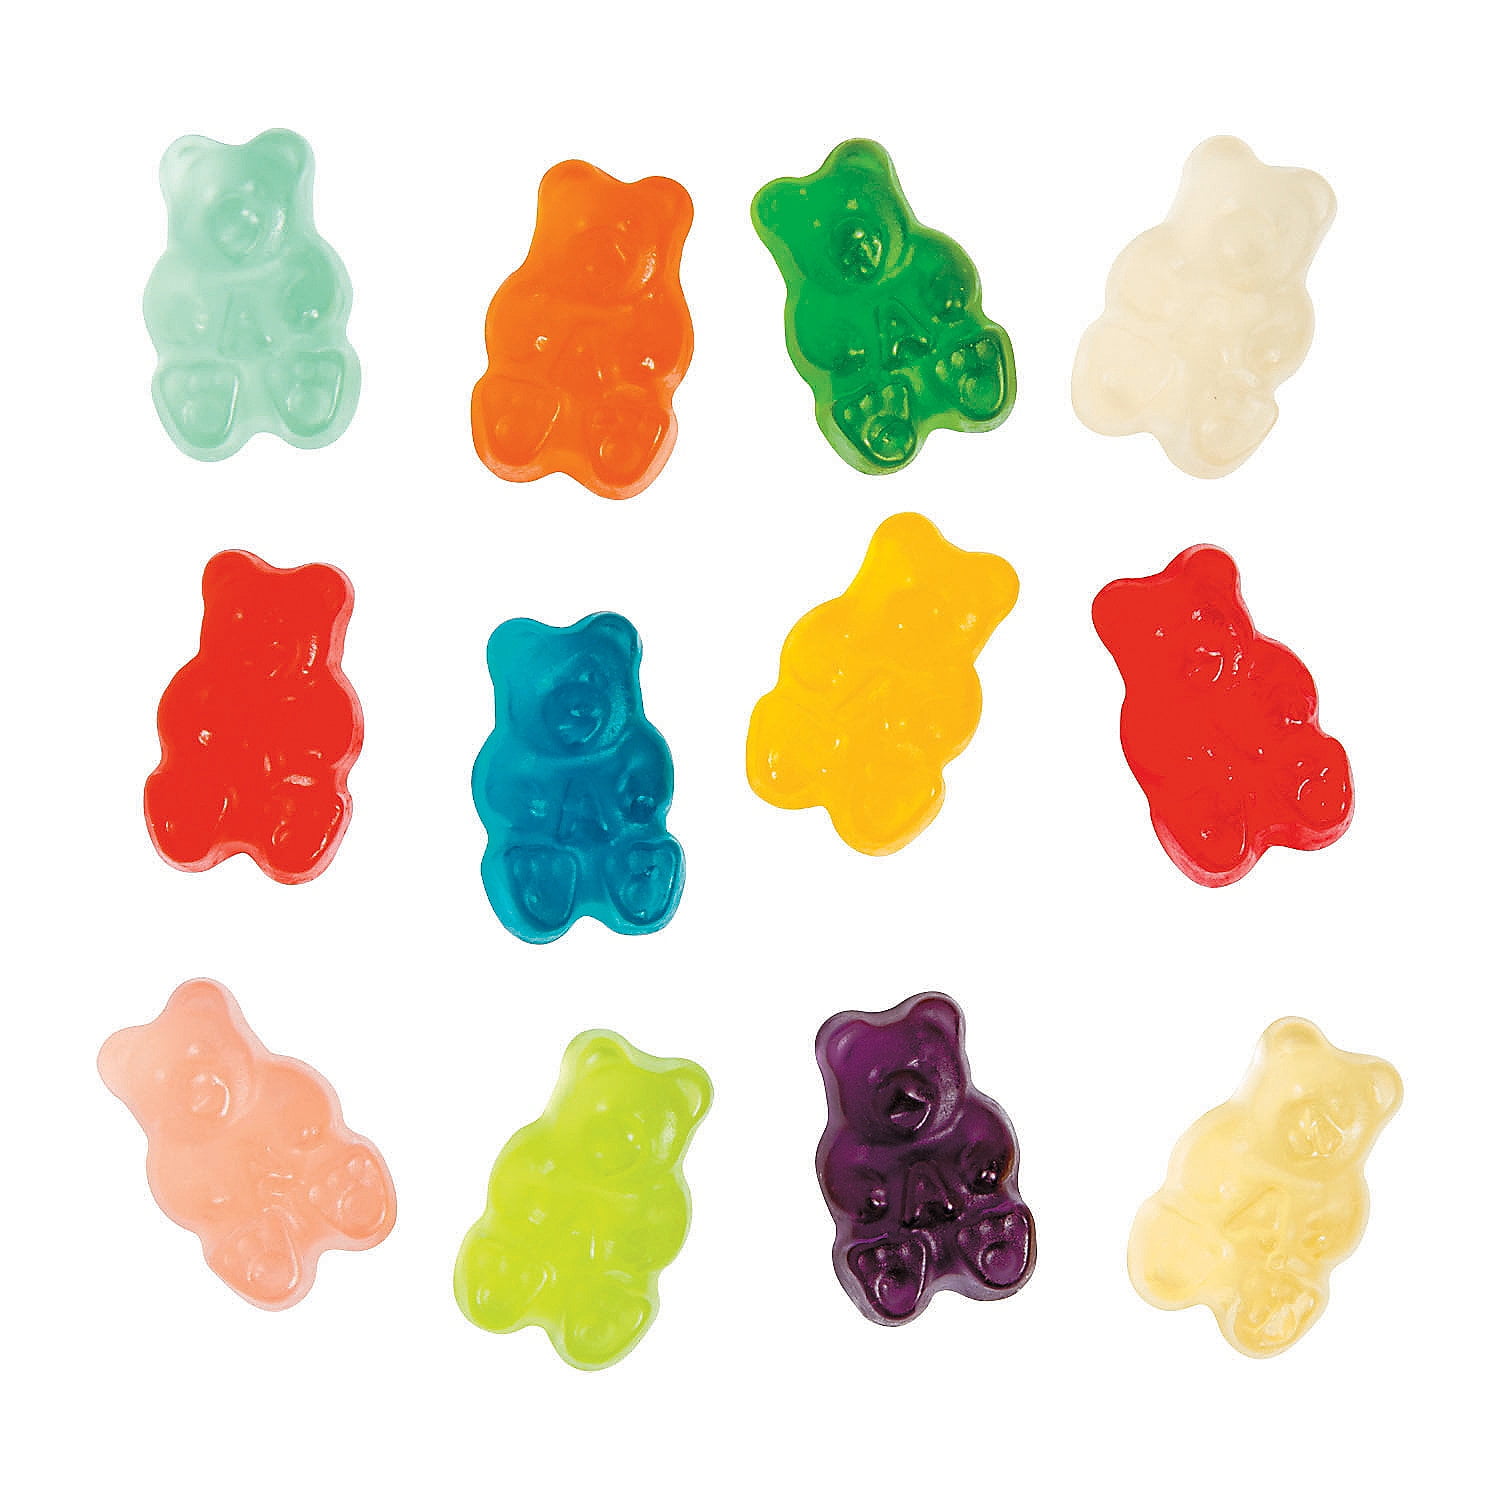 Advanced Graphics Gummy Bears Cardboard Cutout Standup (3 Pack: Orange, Red and Blue)